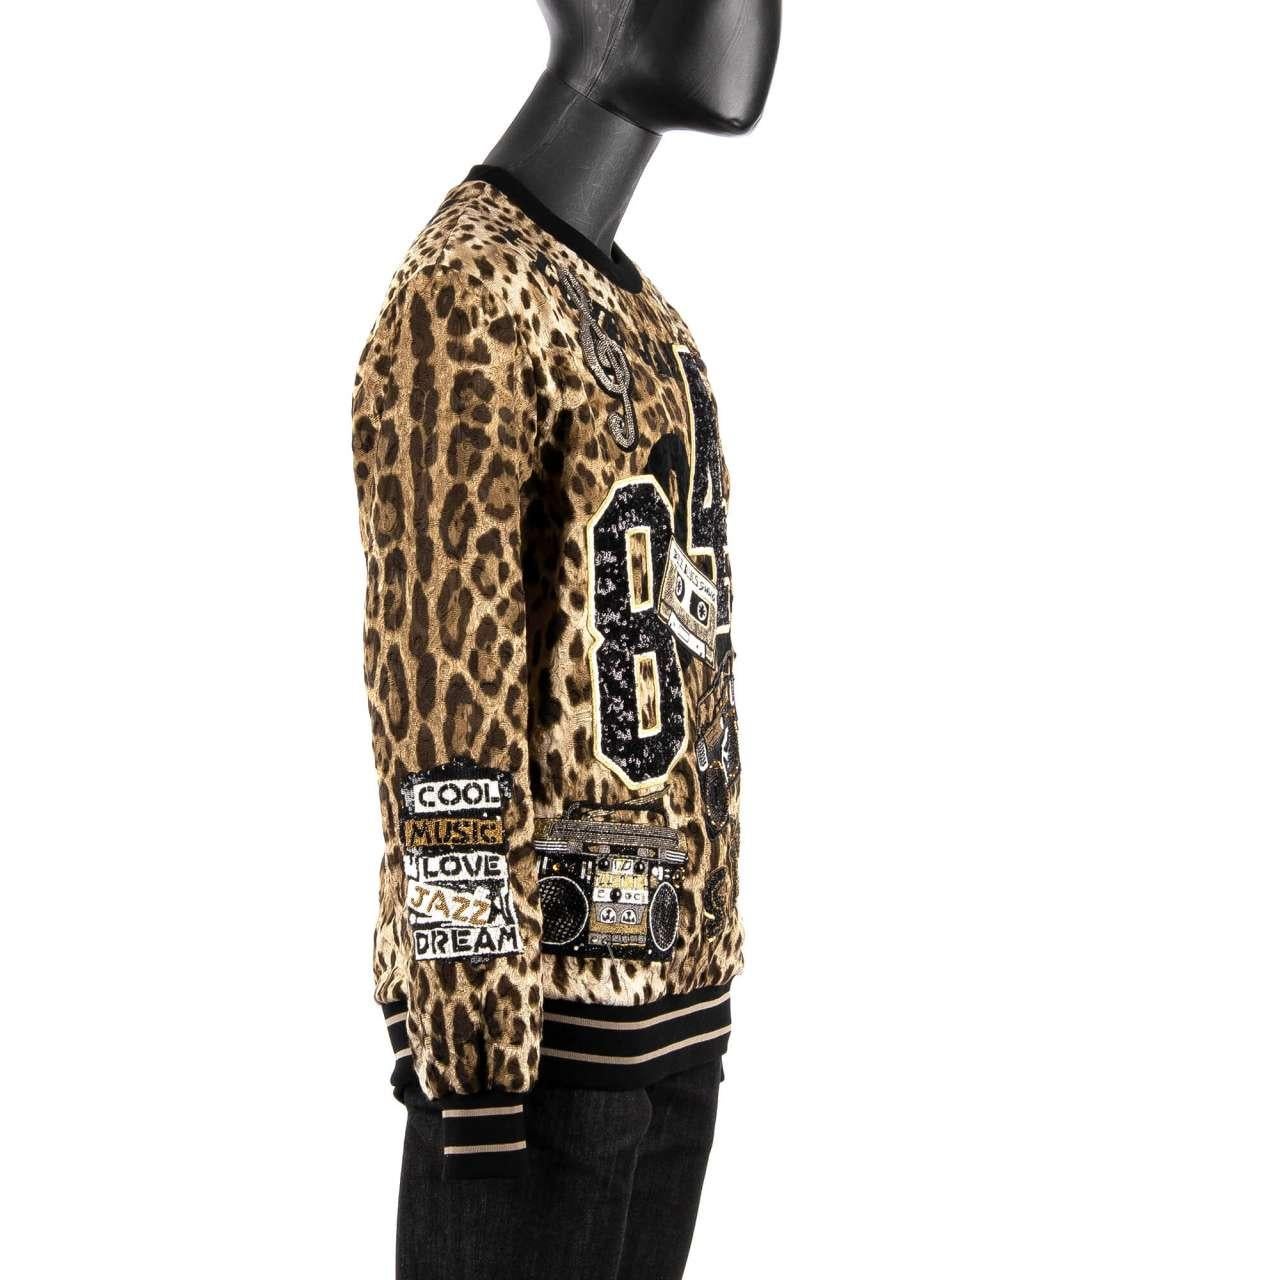 Men's D&G Leopard Printed Sweater with Jazz Samba Music Embroidery Black Brown 48 For Sale